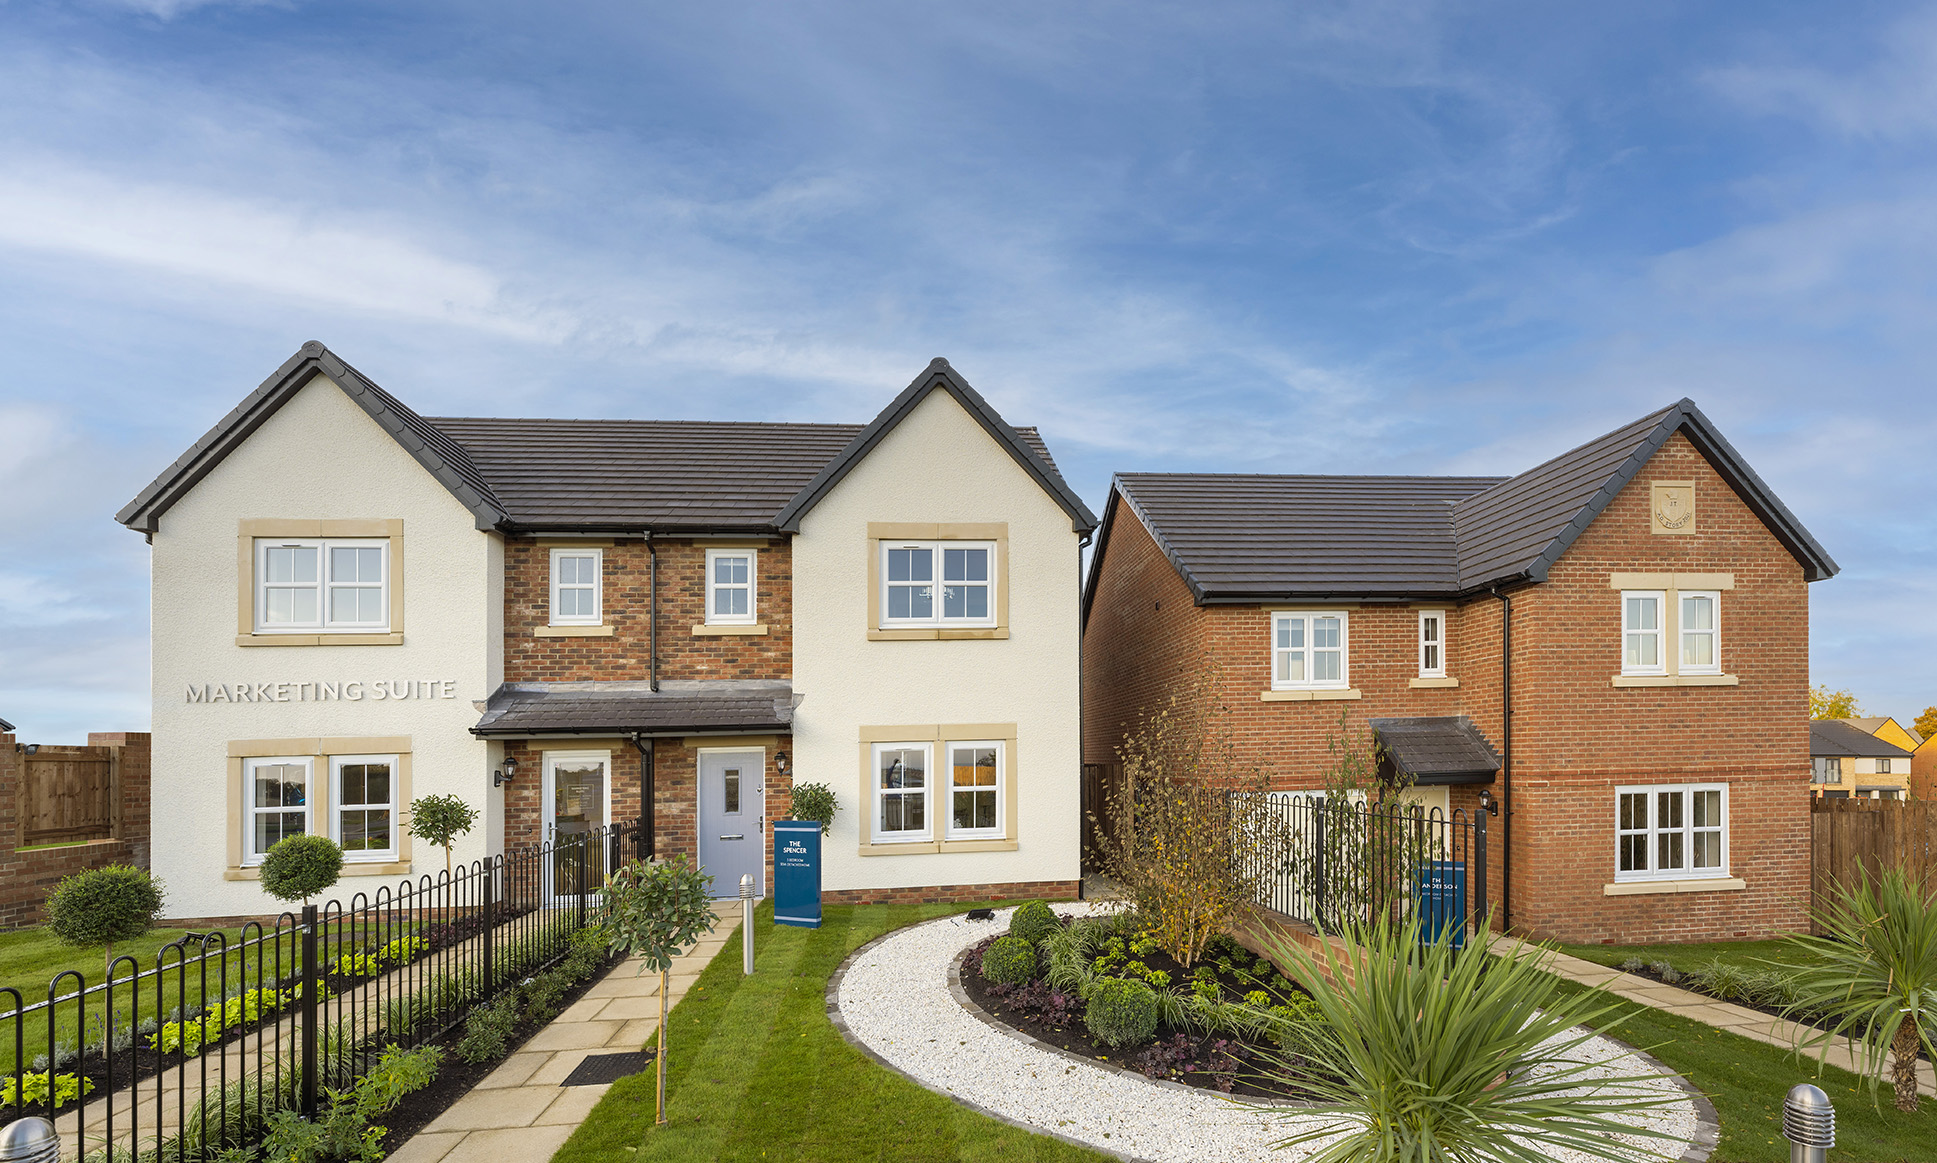 Visit The Birches show homes